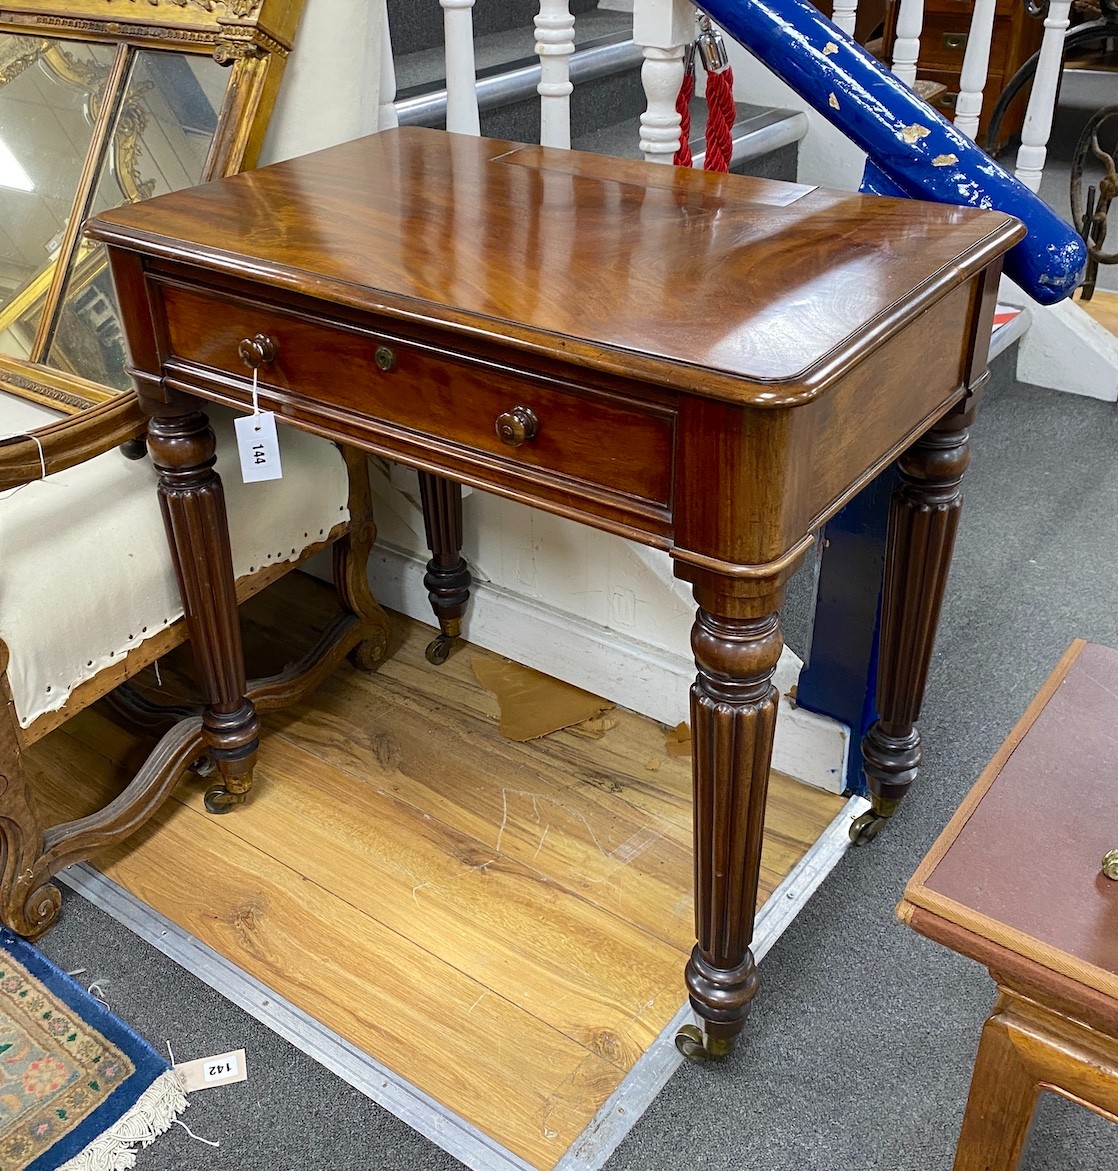 An early Victorian mahogany writing table stamped M Willson, 68 Great Queen Street, width 76cm, depth 48cm, height 74cm